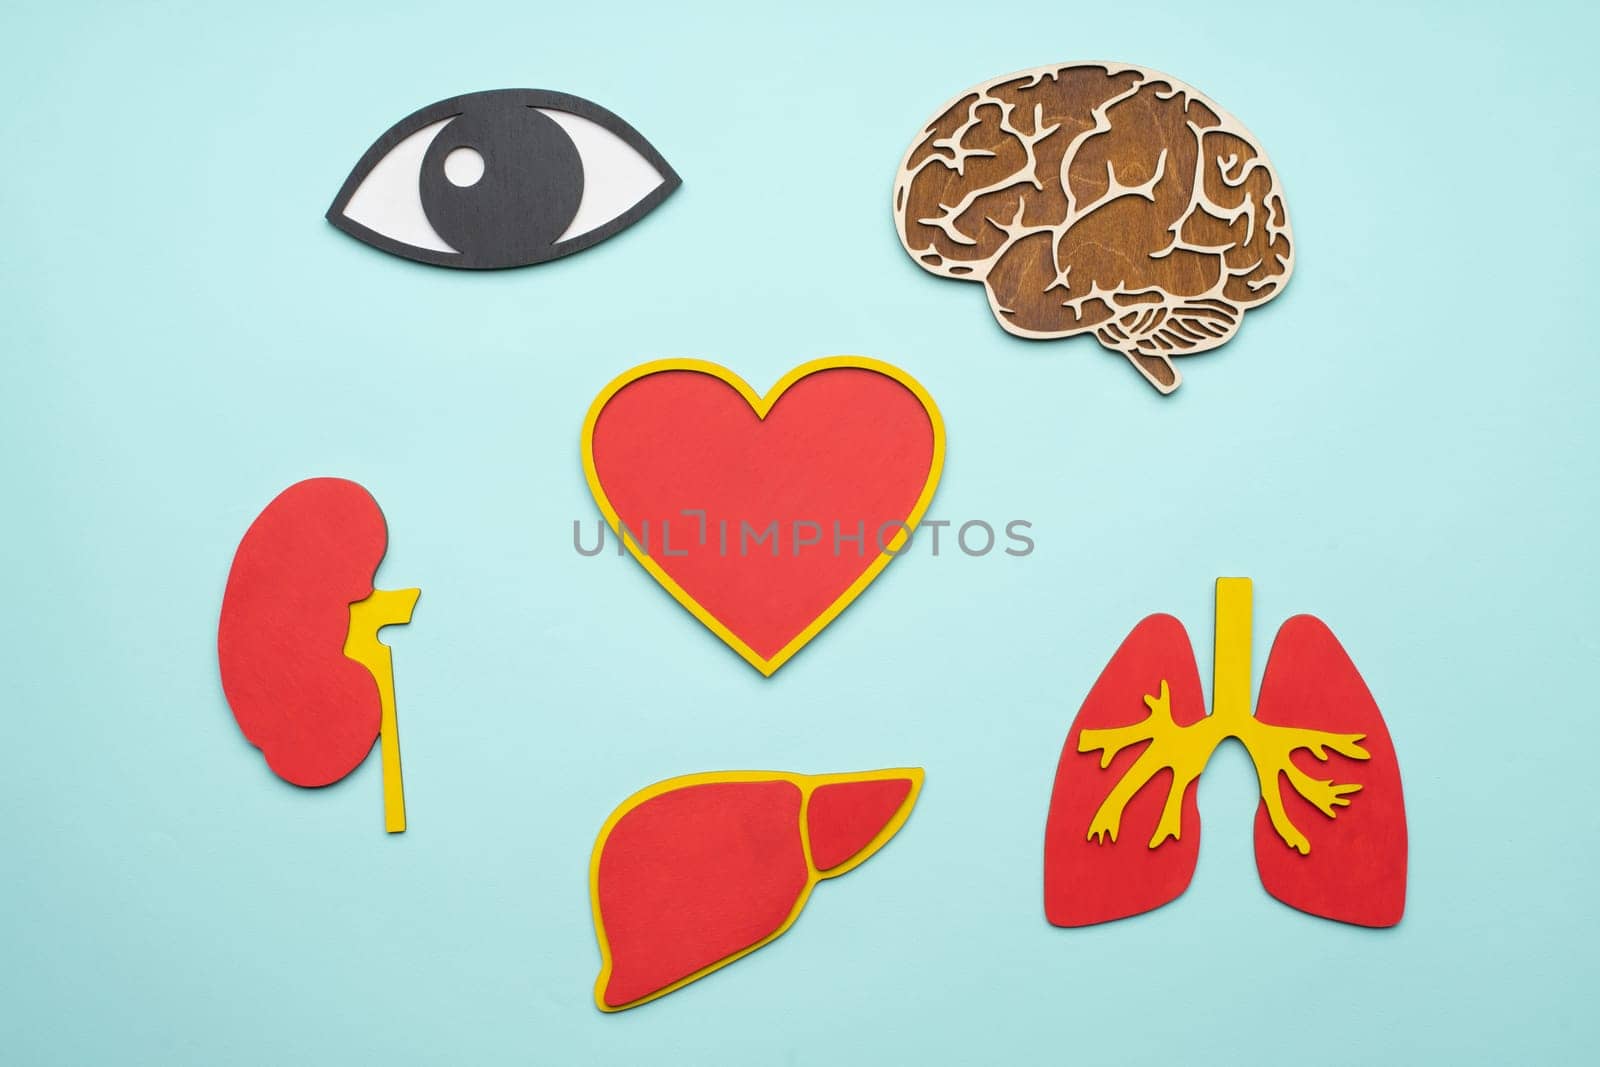 mockup of eye, brain, lungs, heart, kidney and liver on blue background